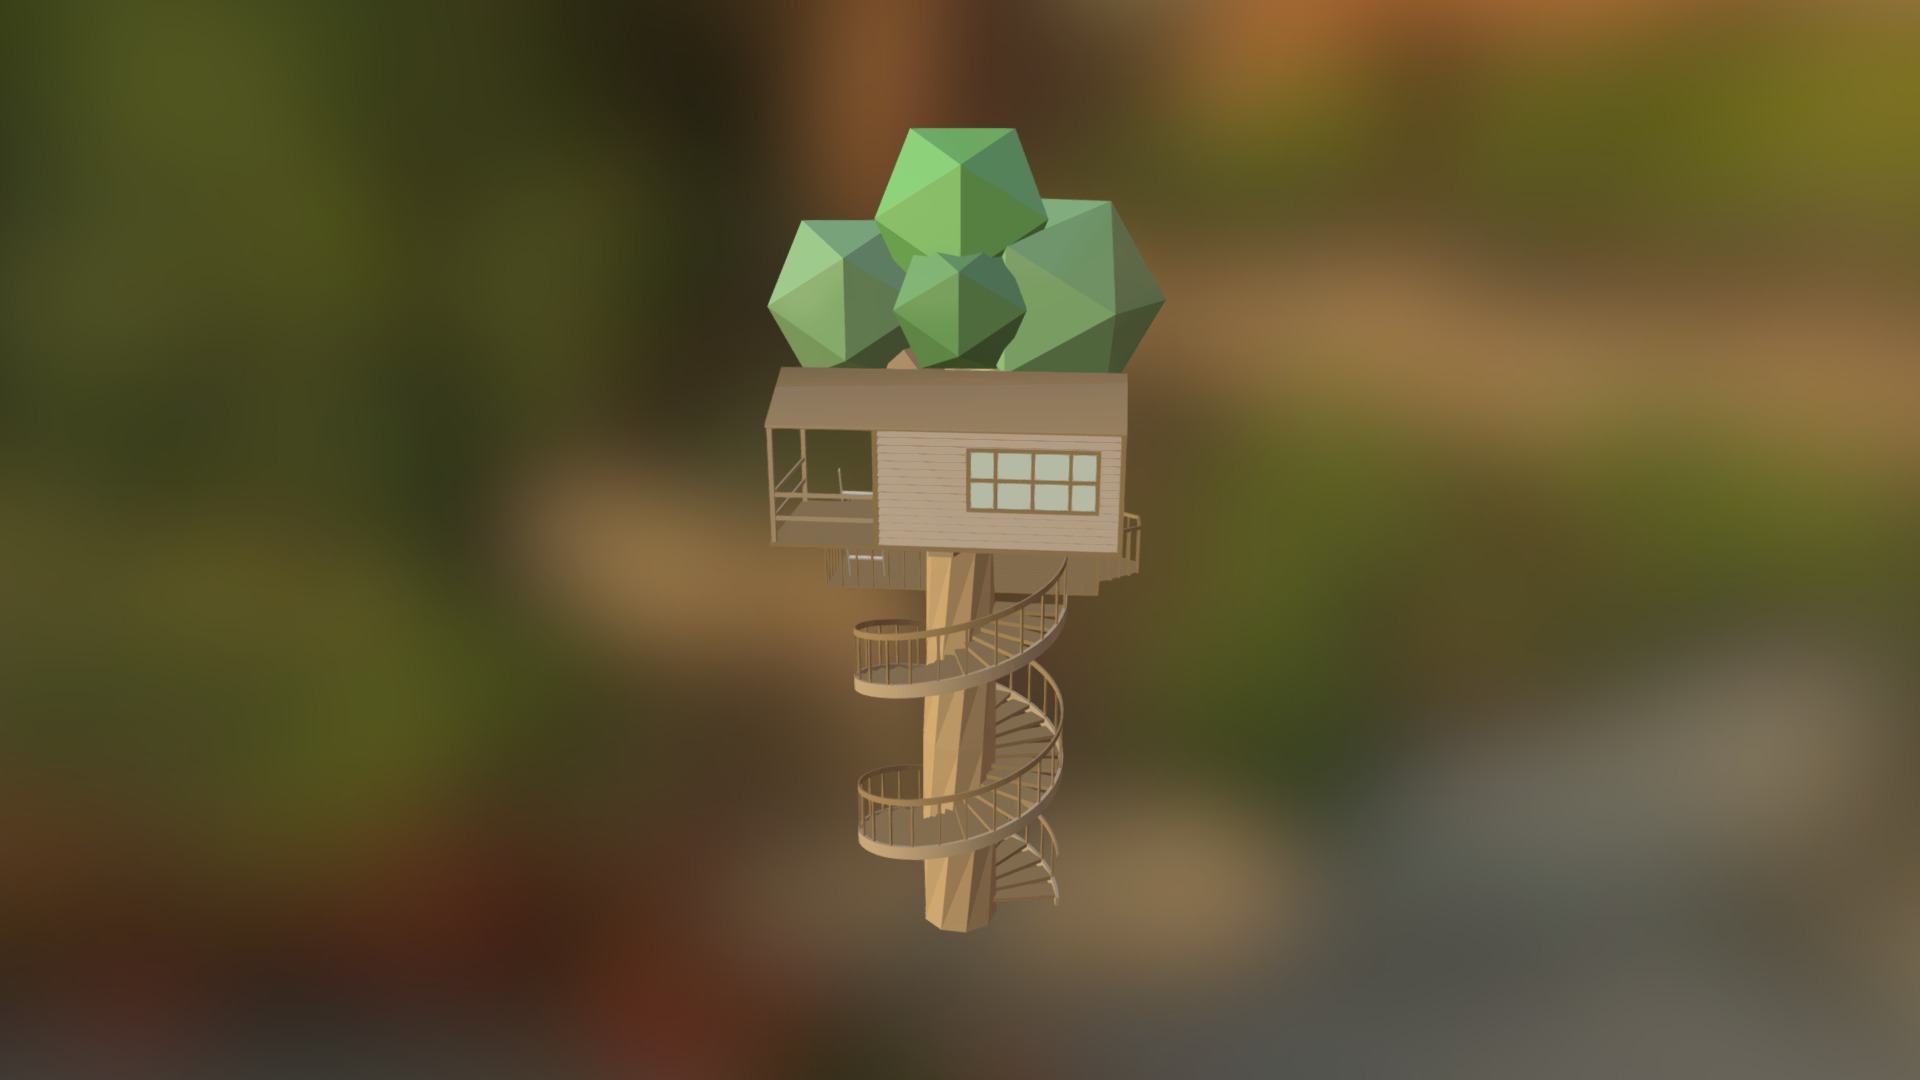 3D model Tree House [Low Poly] - This is a 3D model of the Tree House [Low Poly]. The 3D model is about a house made of green and white paper.